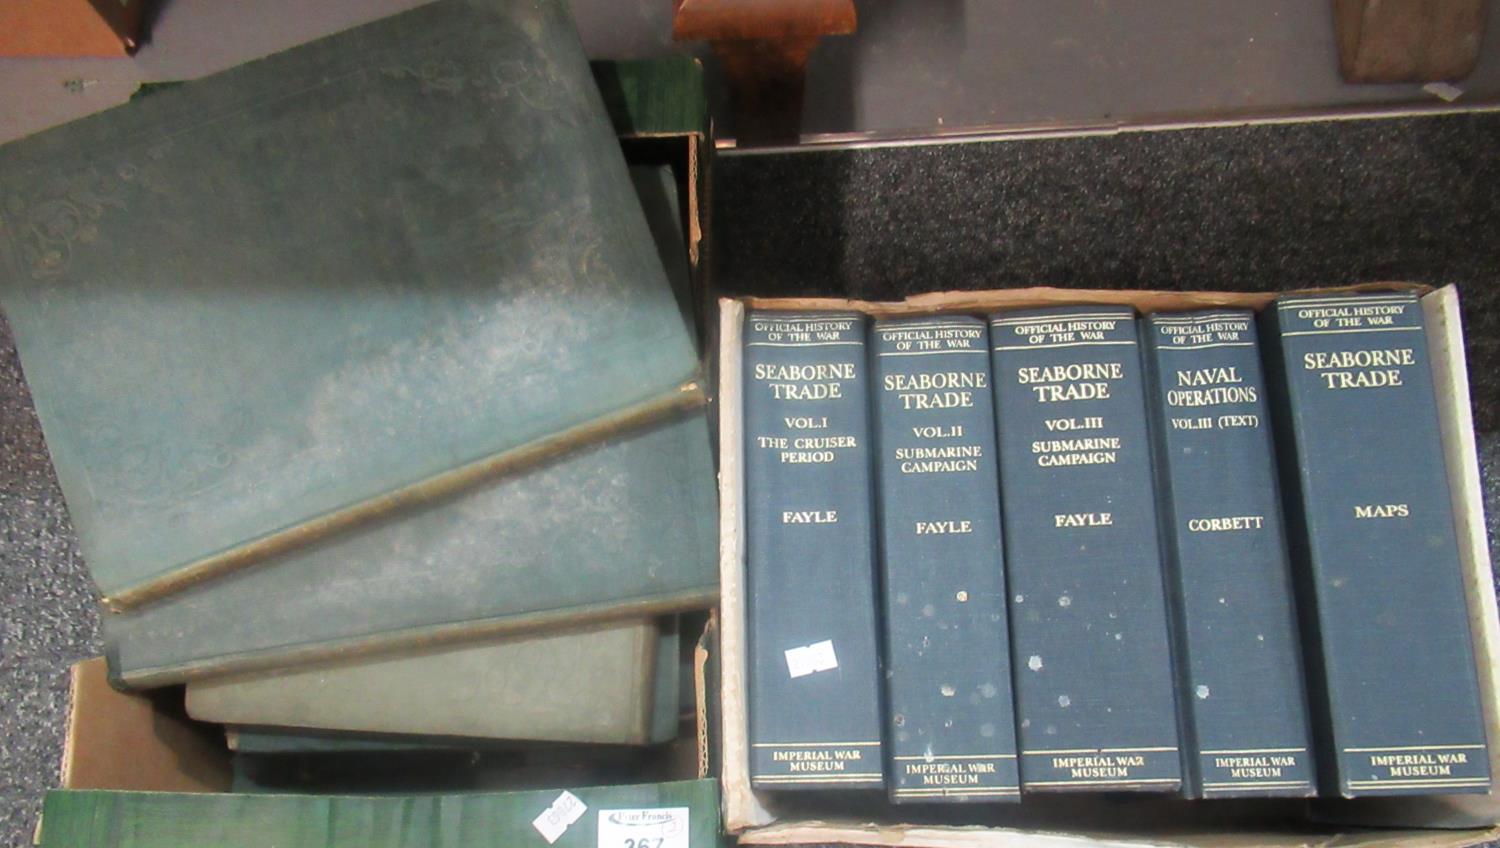 Box containing 9 volumes of 'The Imperial Journal of Art, Science, Mechanics and Engineering'